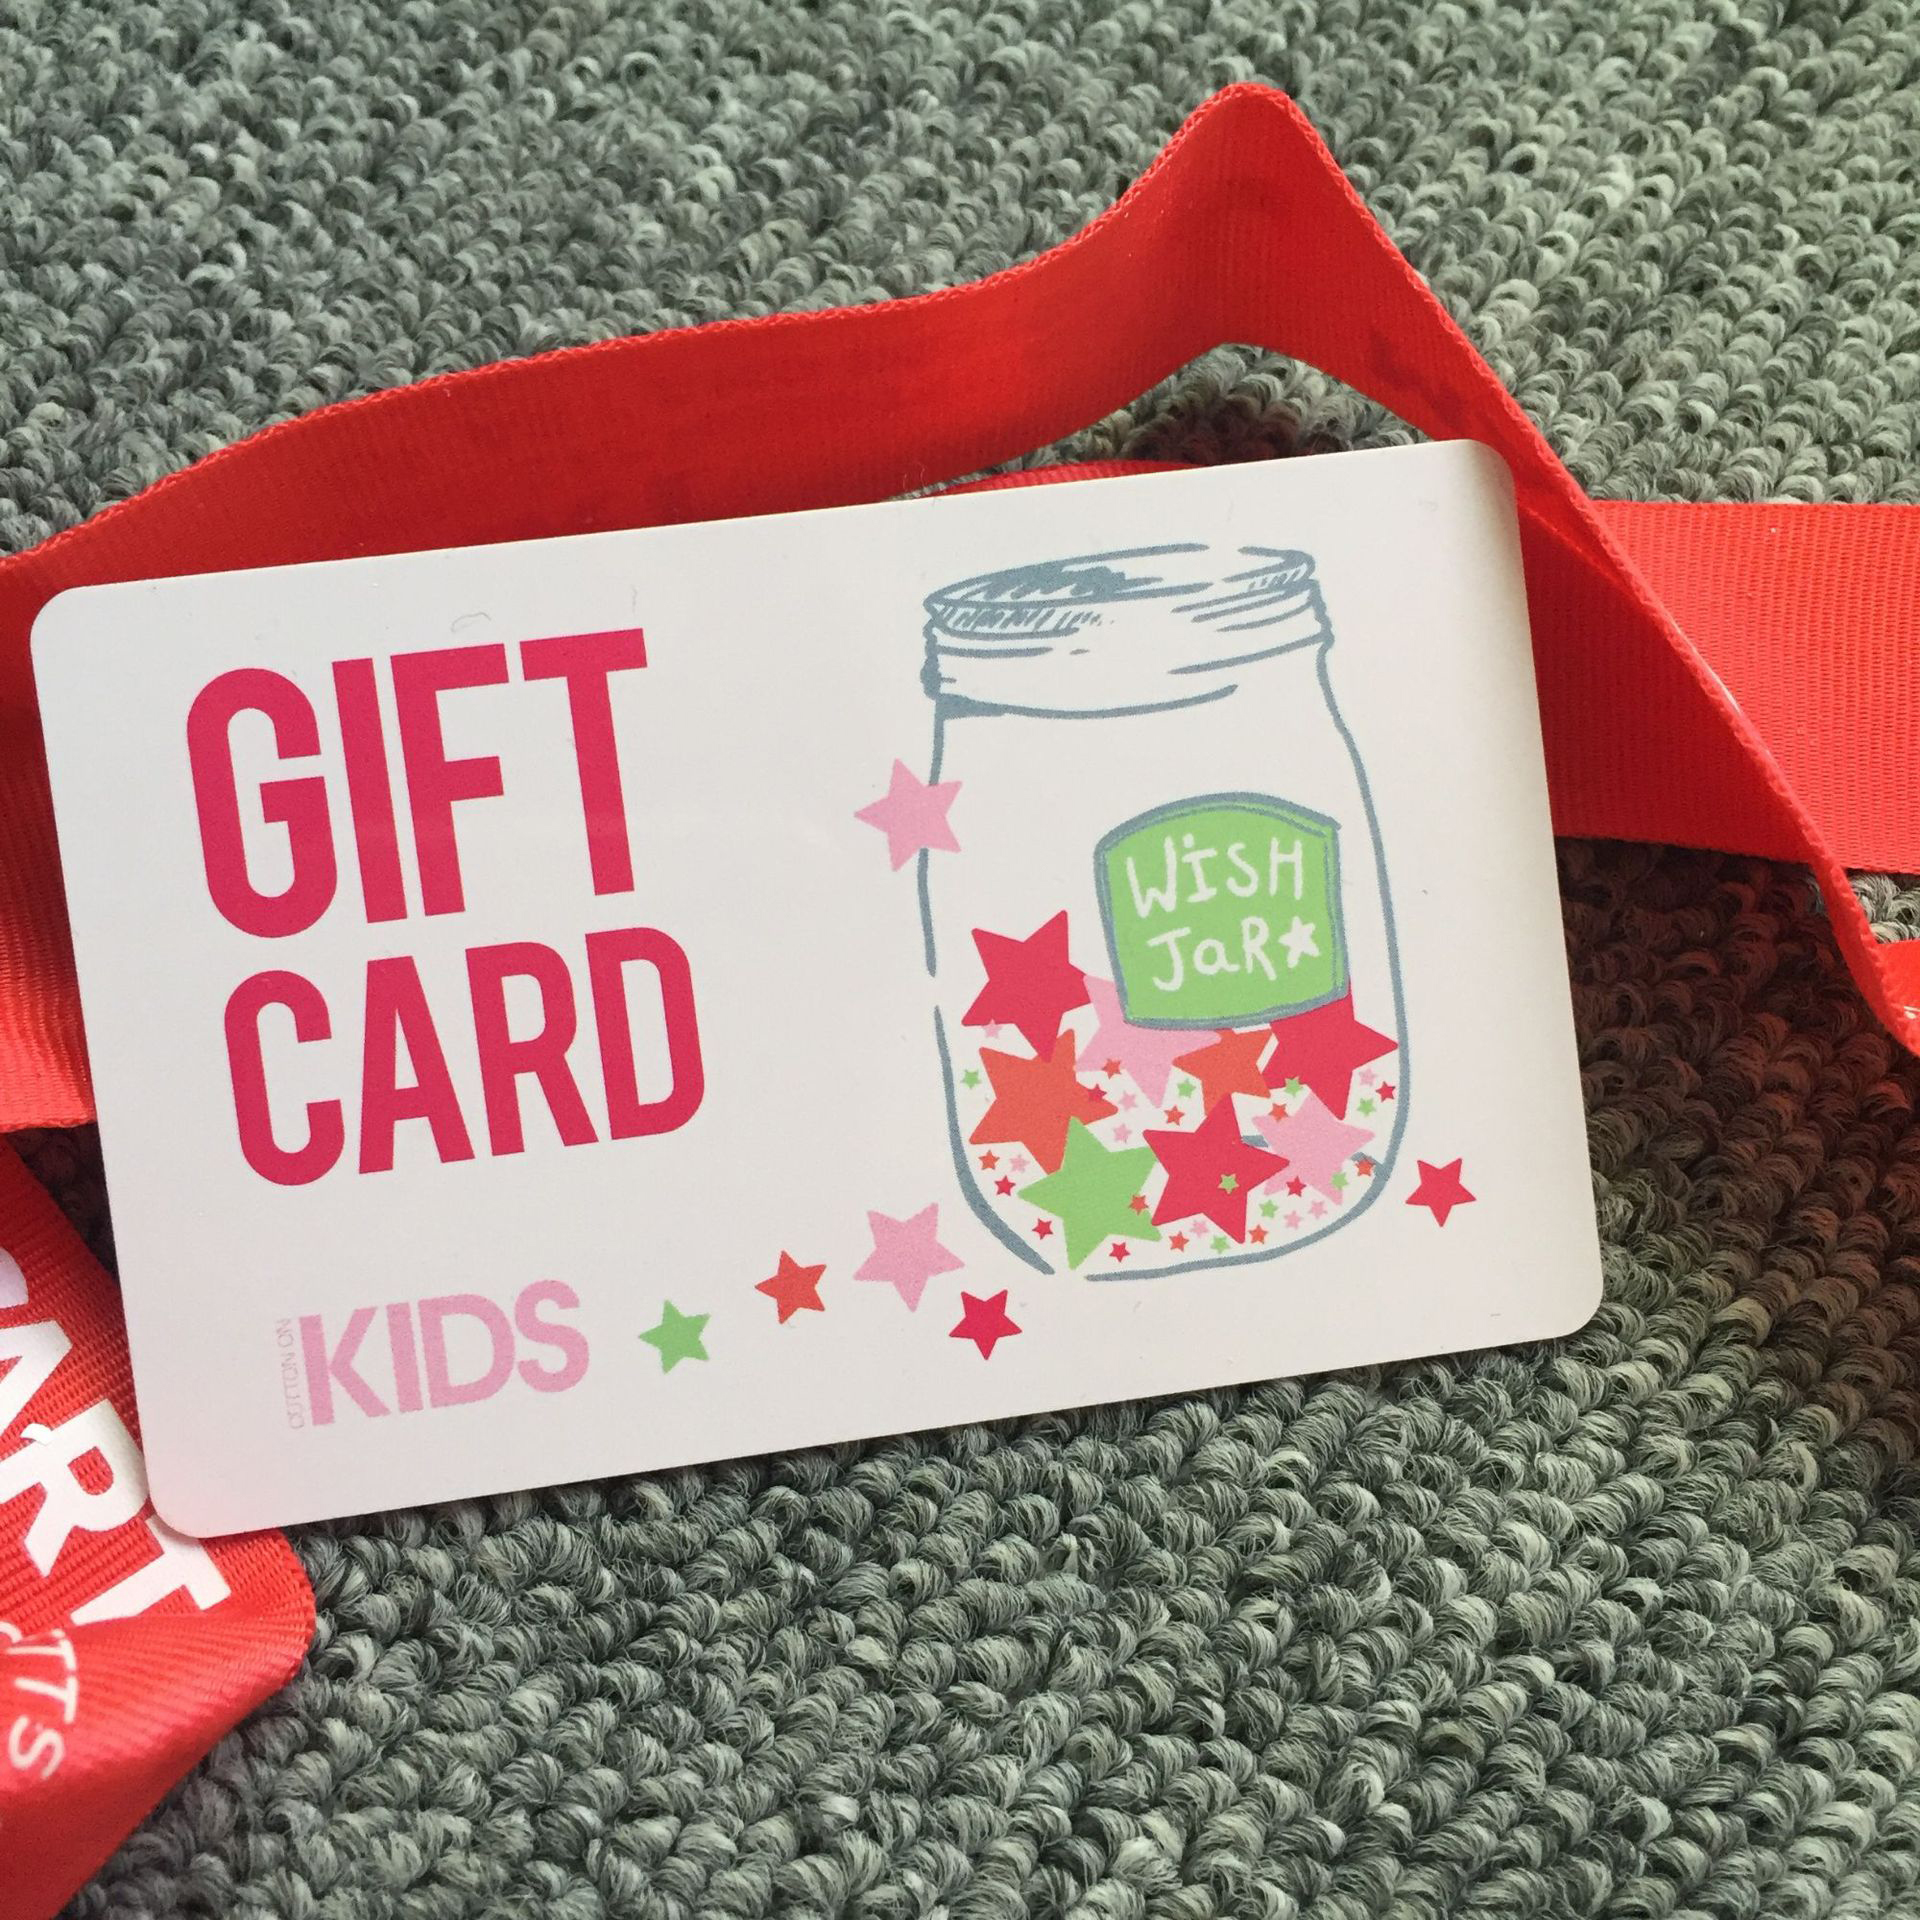 Promotional Plastic Gift Cards